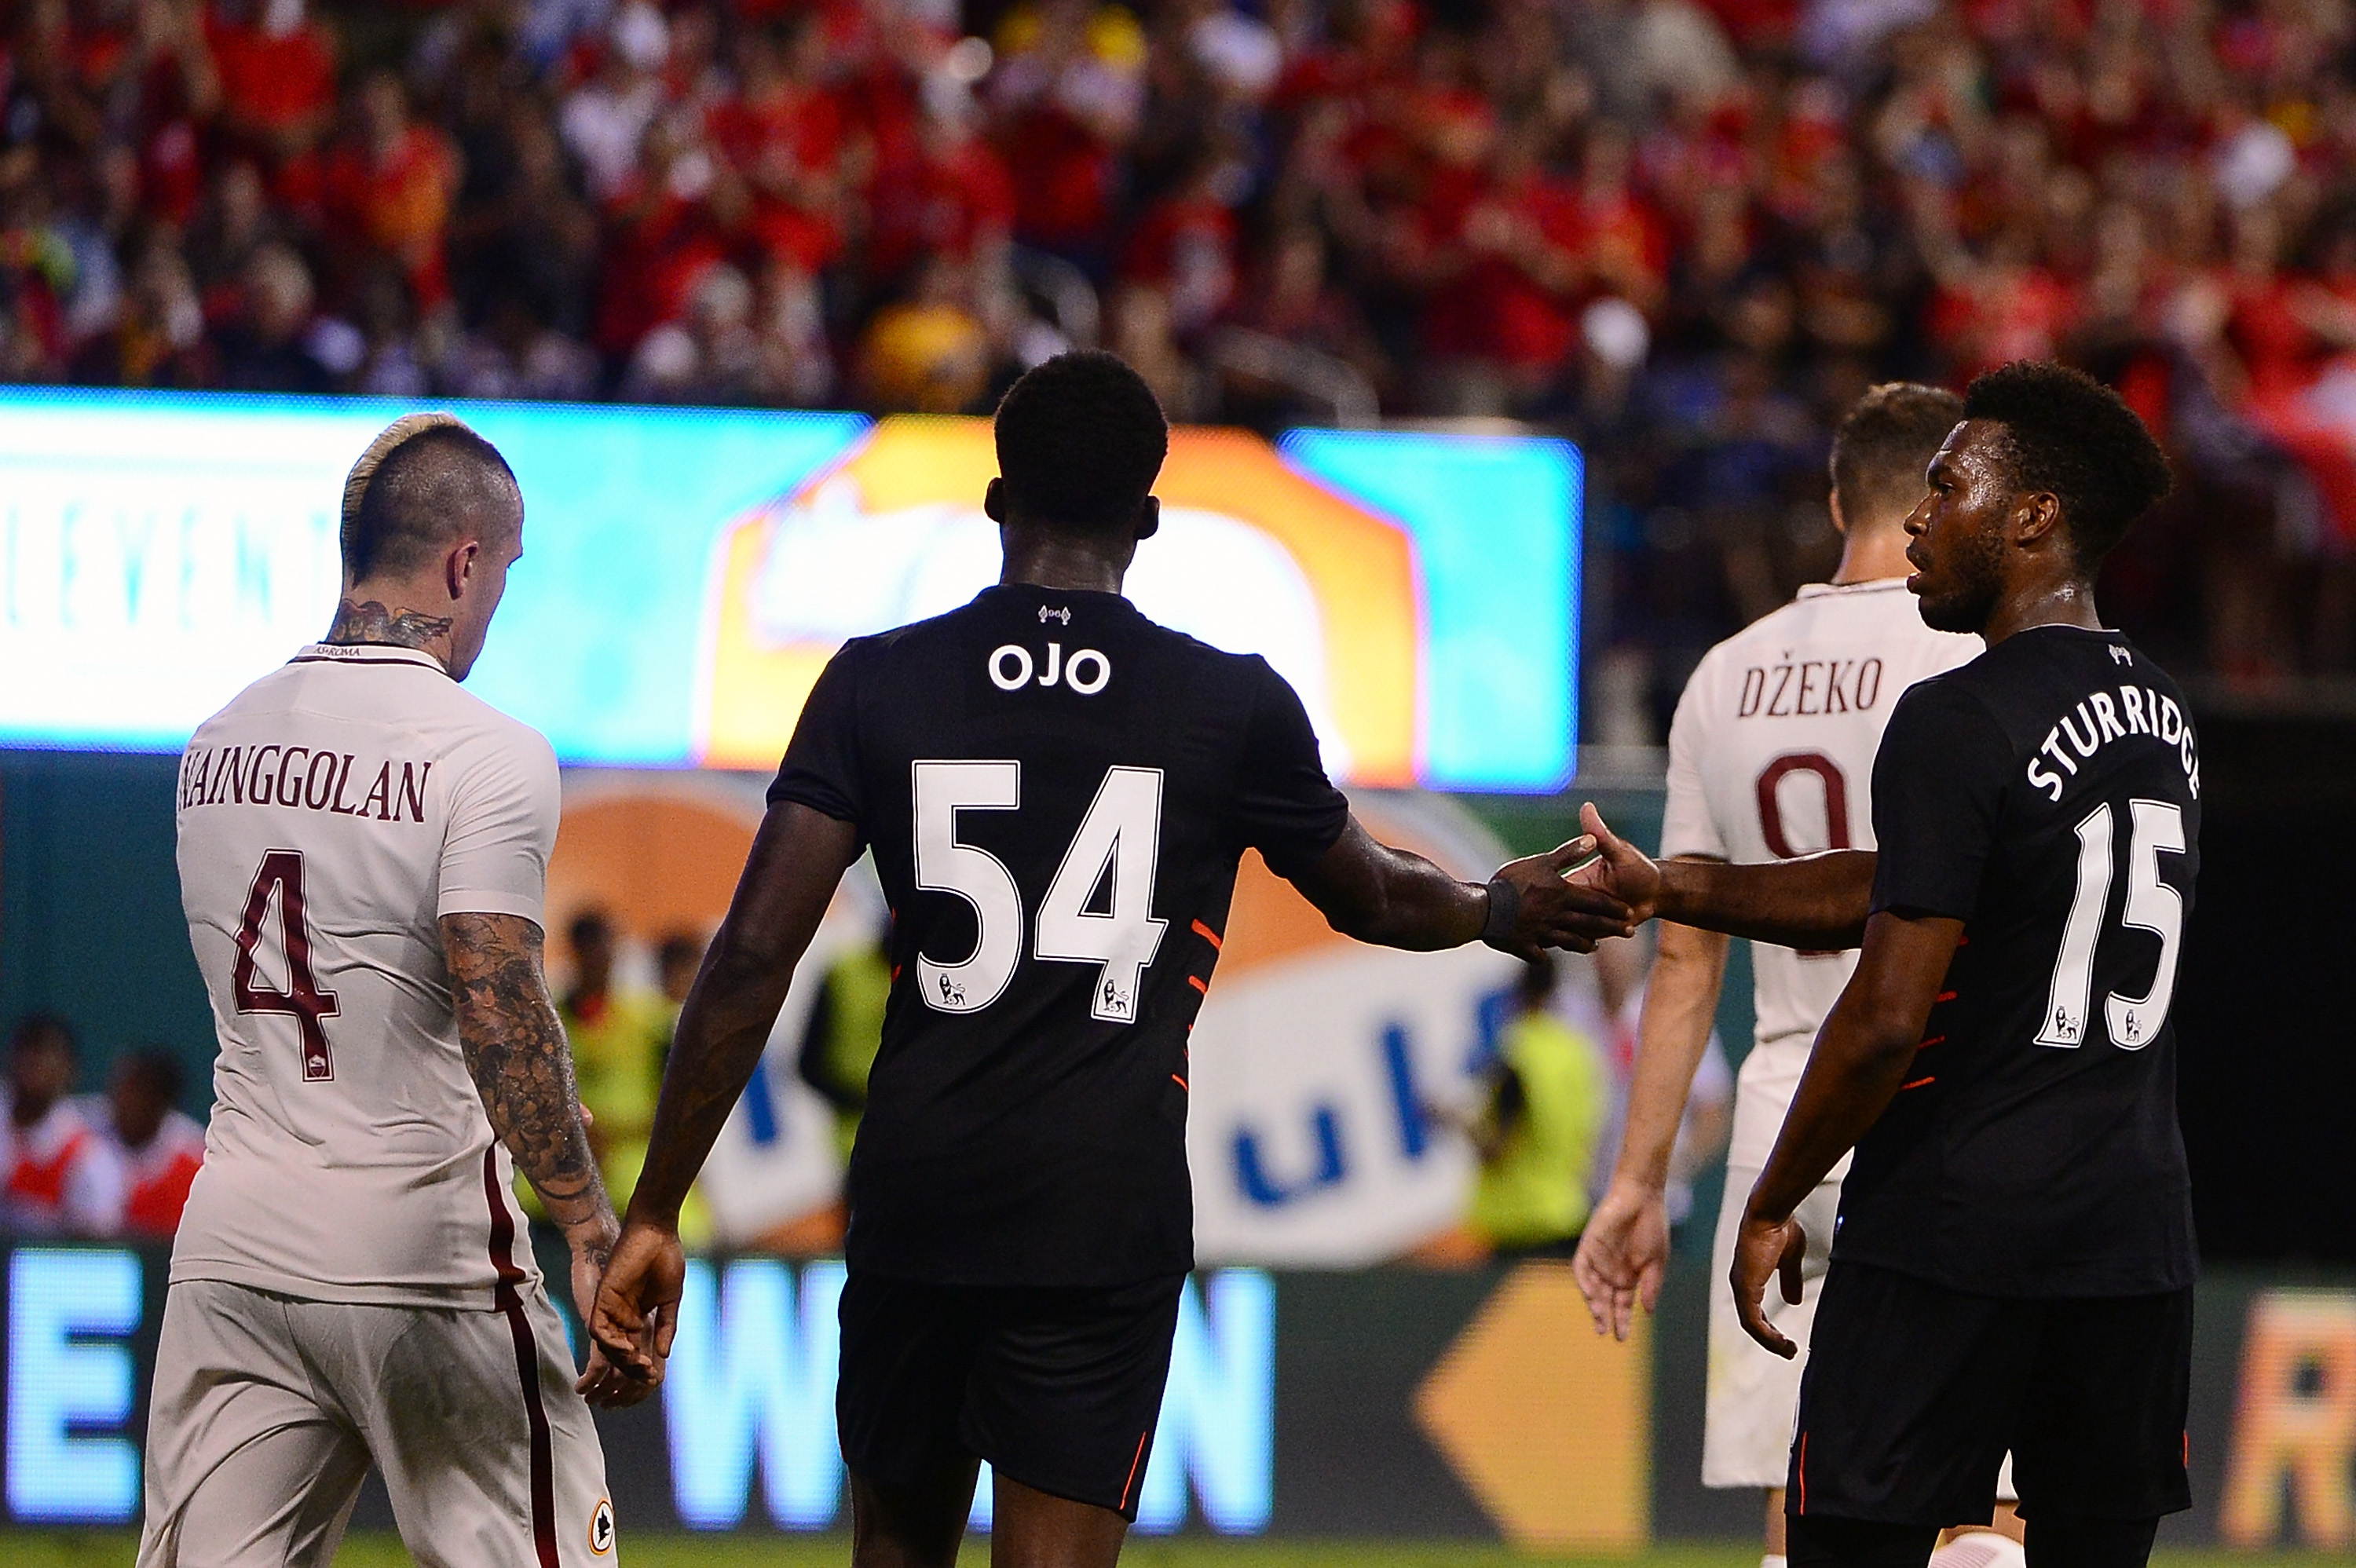 ST LOUIS, MO - AUGUST 01: Sheyi Ojo #54 of Liverpool FC is congratulated on his goal by Daniel Sturridge #15 during a friendly match against AS Roma at Busch Stadium on August 1, 2016 in St Louis, Missouri. AC Roma won 2-1. (Photo by Jeff Curry/Getty Images)